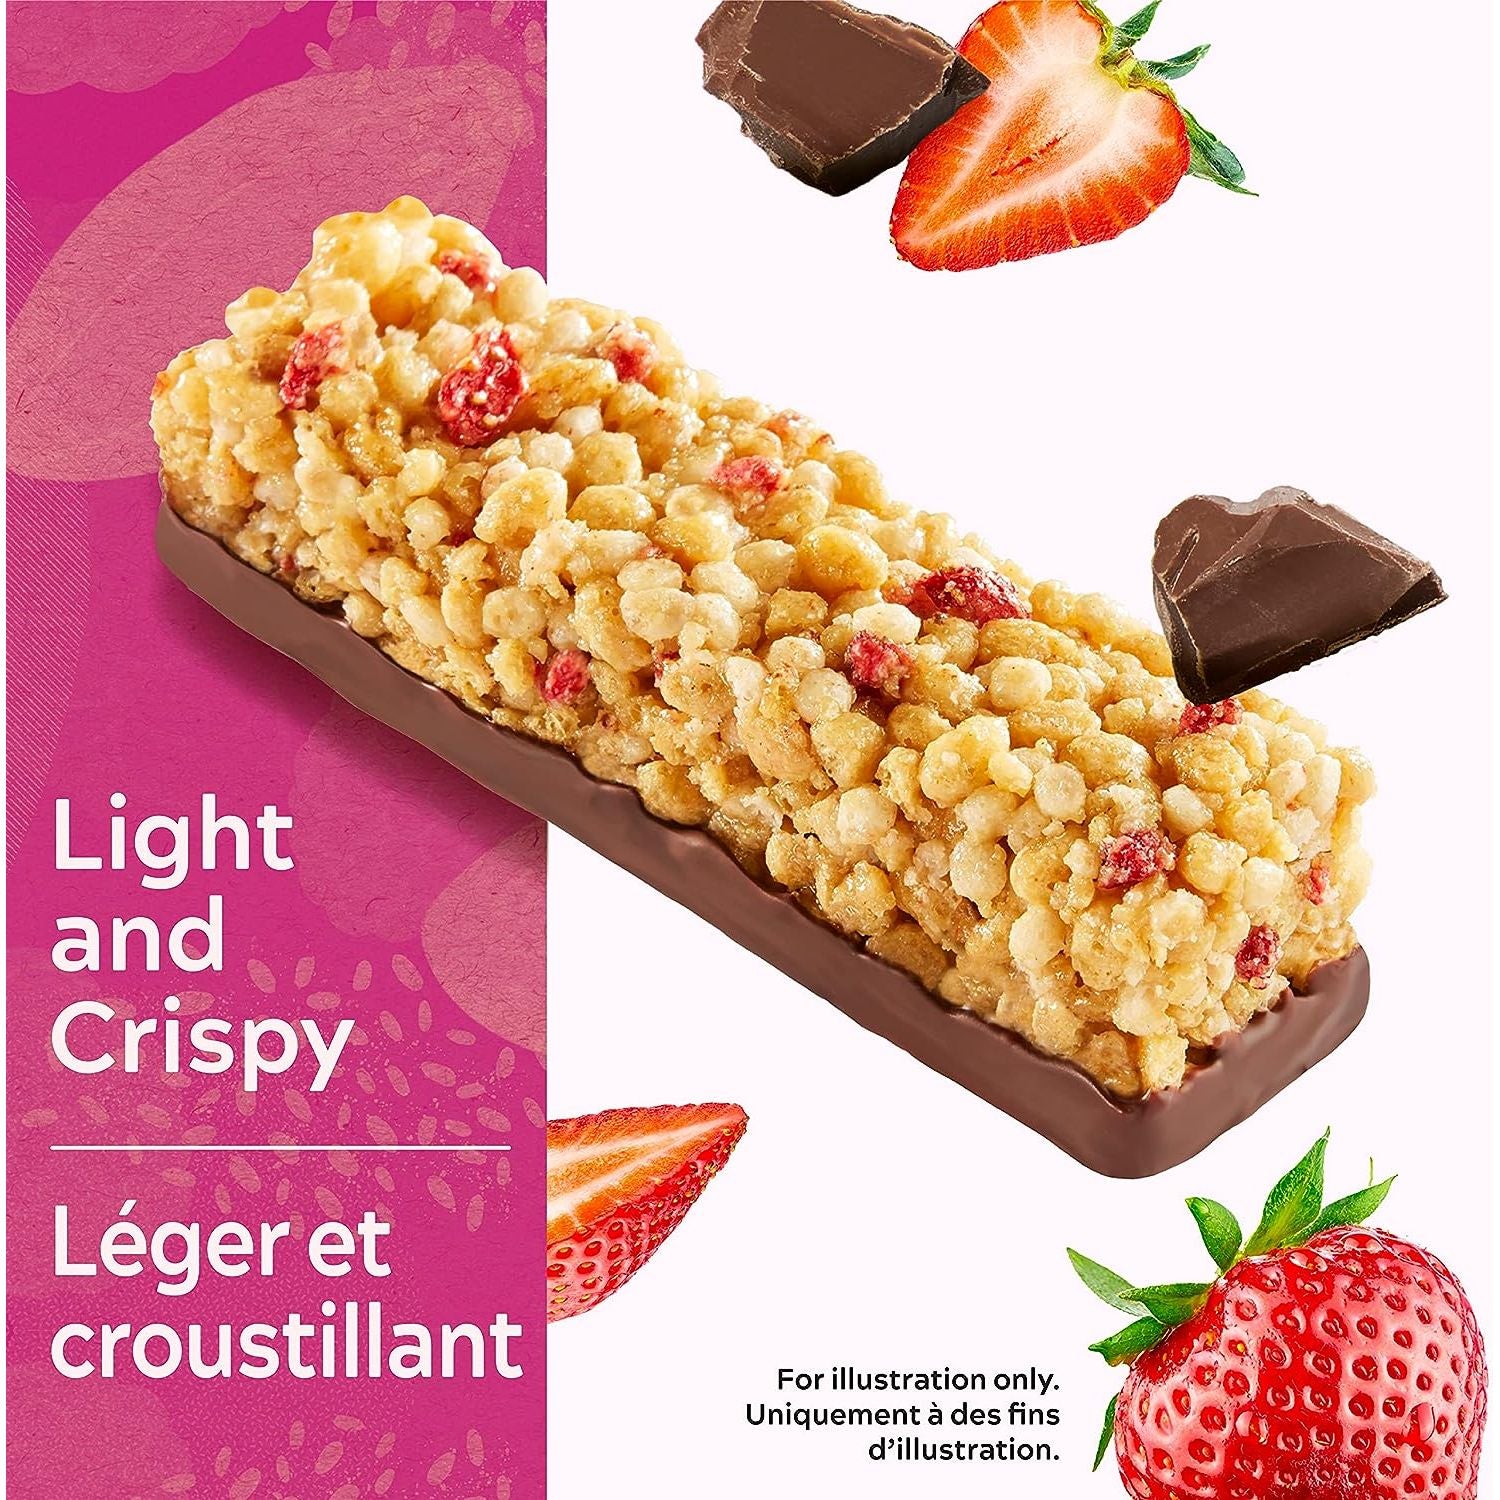 SimplyProtein Dipped Bar (1 bar) Protein Snacks Strawberry Chocolate SimplyProtein